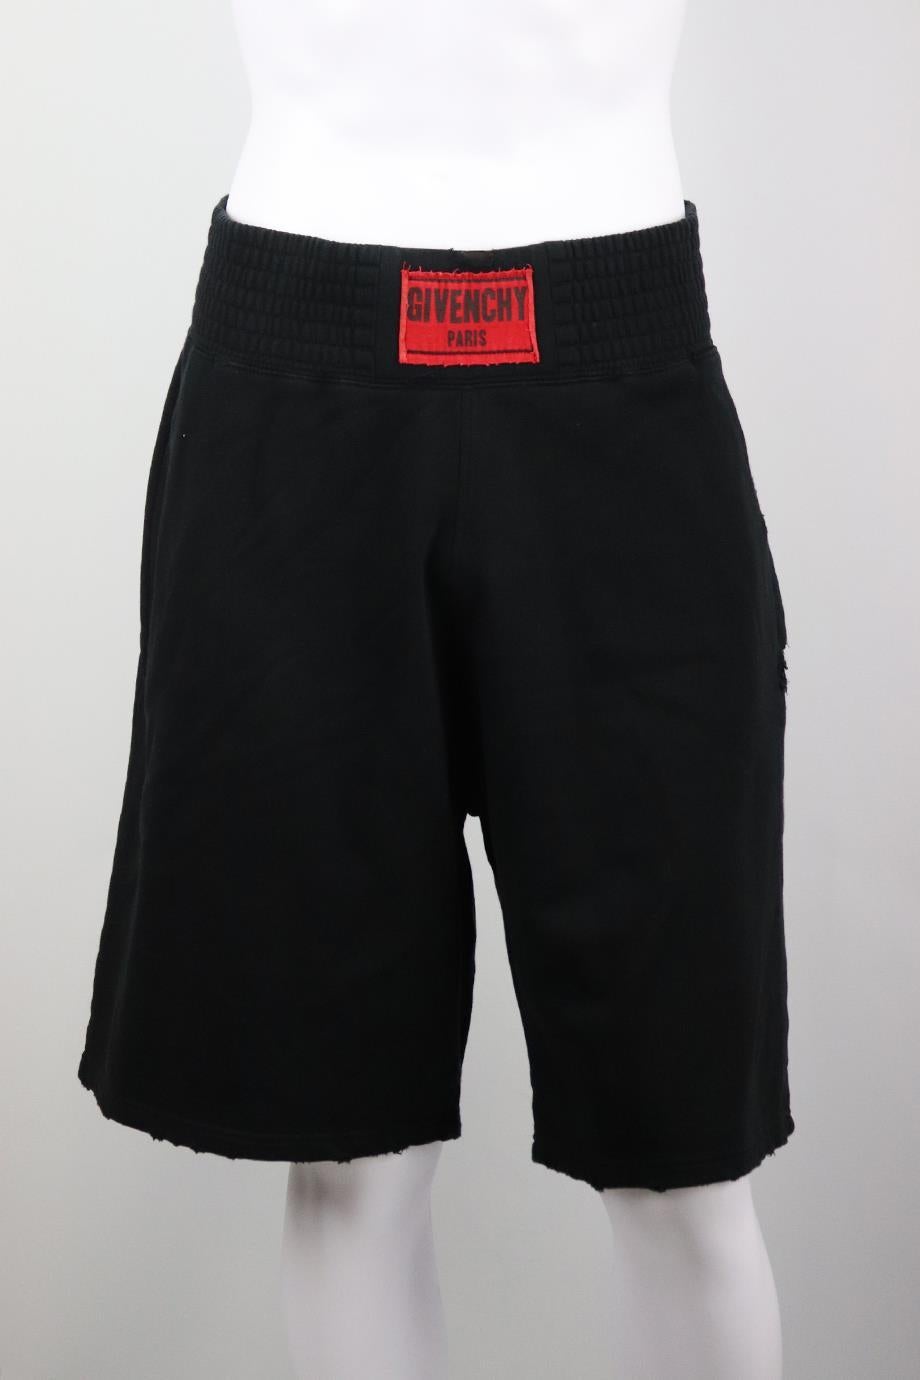 Givenchy men's distressed cotton shorts. Black and red. Pull on.100% Cotton. Size: XLarge (EU 52, IT 52, UK/US Waist 36). Waist: 34 in. Hips: 54 in. Length: 23 in. Inseam: 10 in. Rise: 15 in. Very good condition - No sign of wear; see pictures. 
